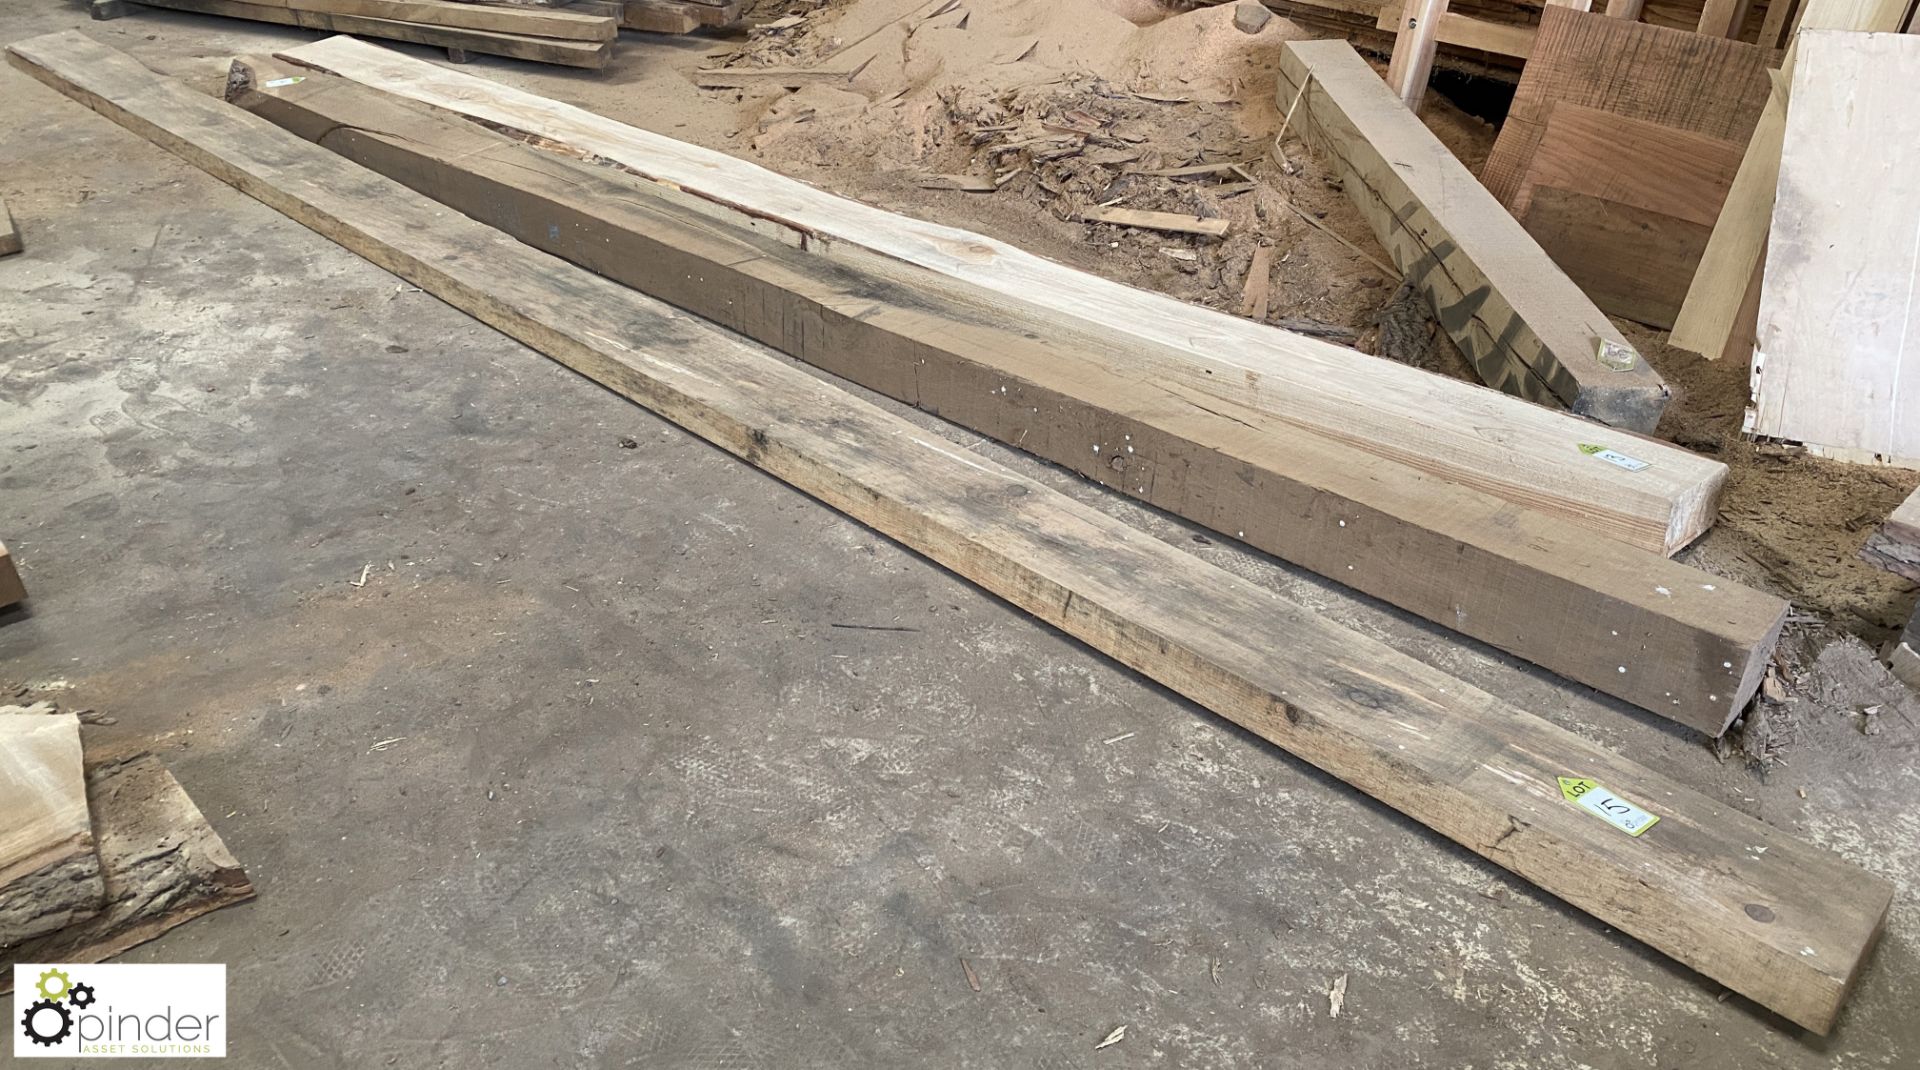 Air dried Softwood Beam, 6220mm x 240mm x 75mm - Image 2 of 7